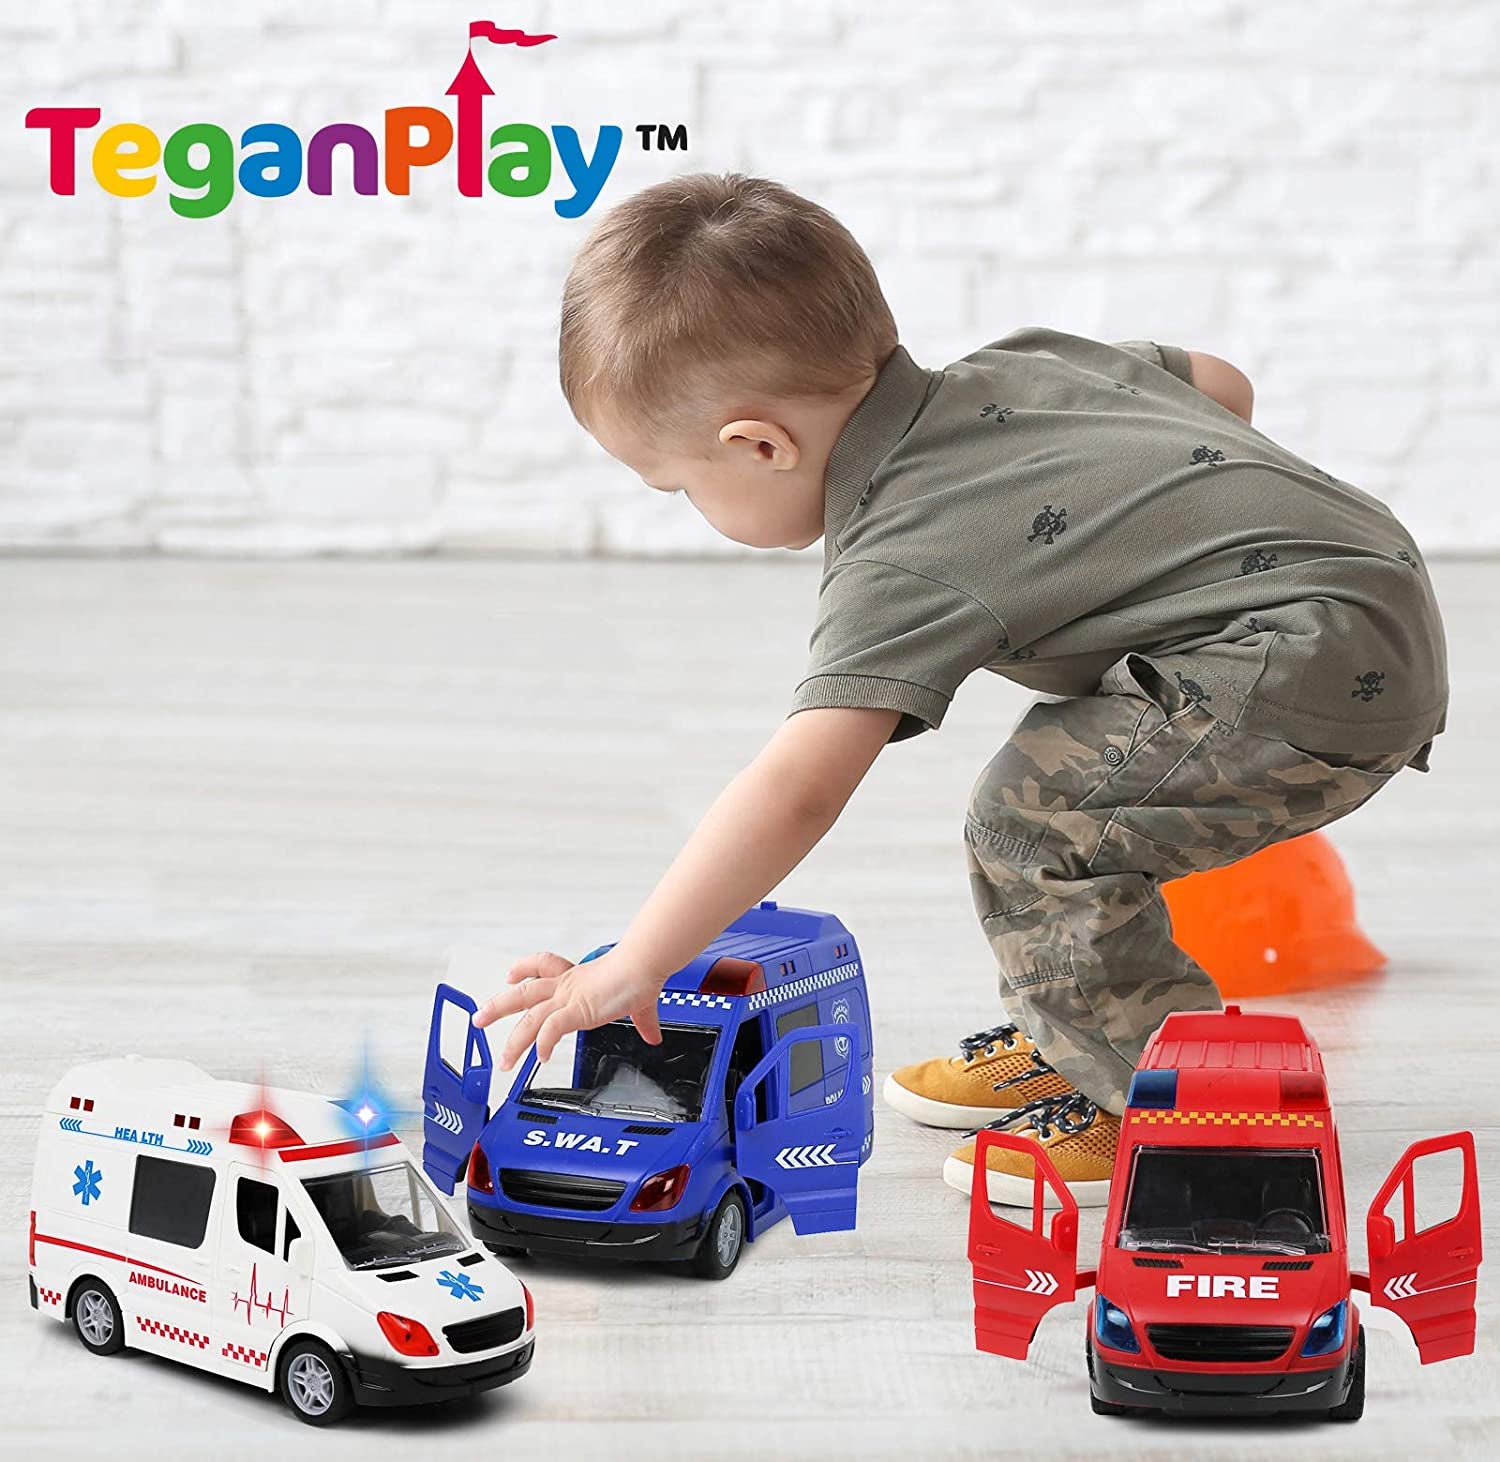 Emergency Vehicles Toy Set [3 Pack] | Ambulance, Fire Engine Truck, Police Car Toys for Boys | Friction Powered with Realistic Lights and Sounds